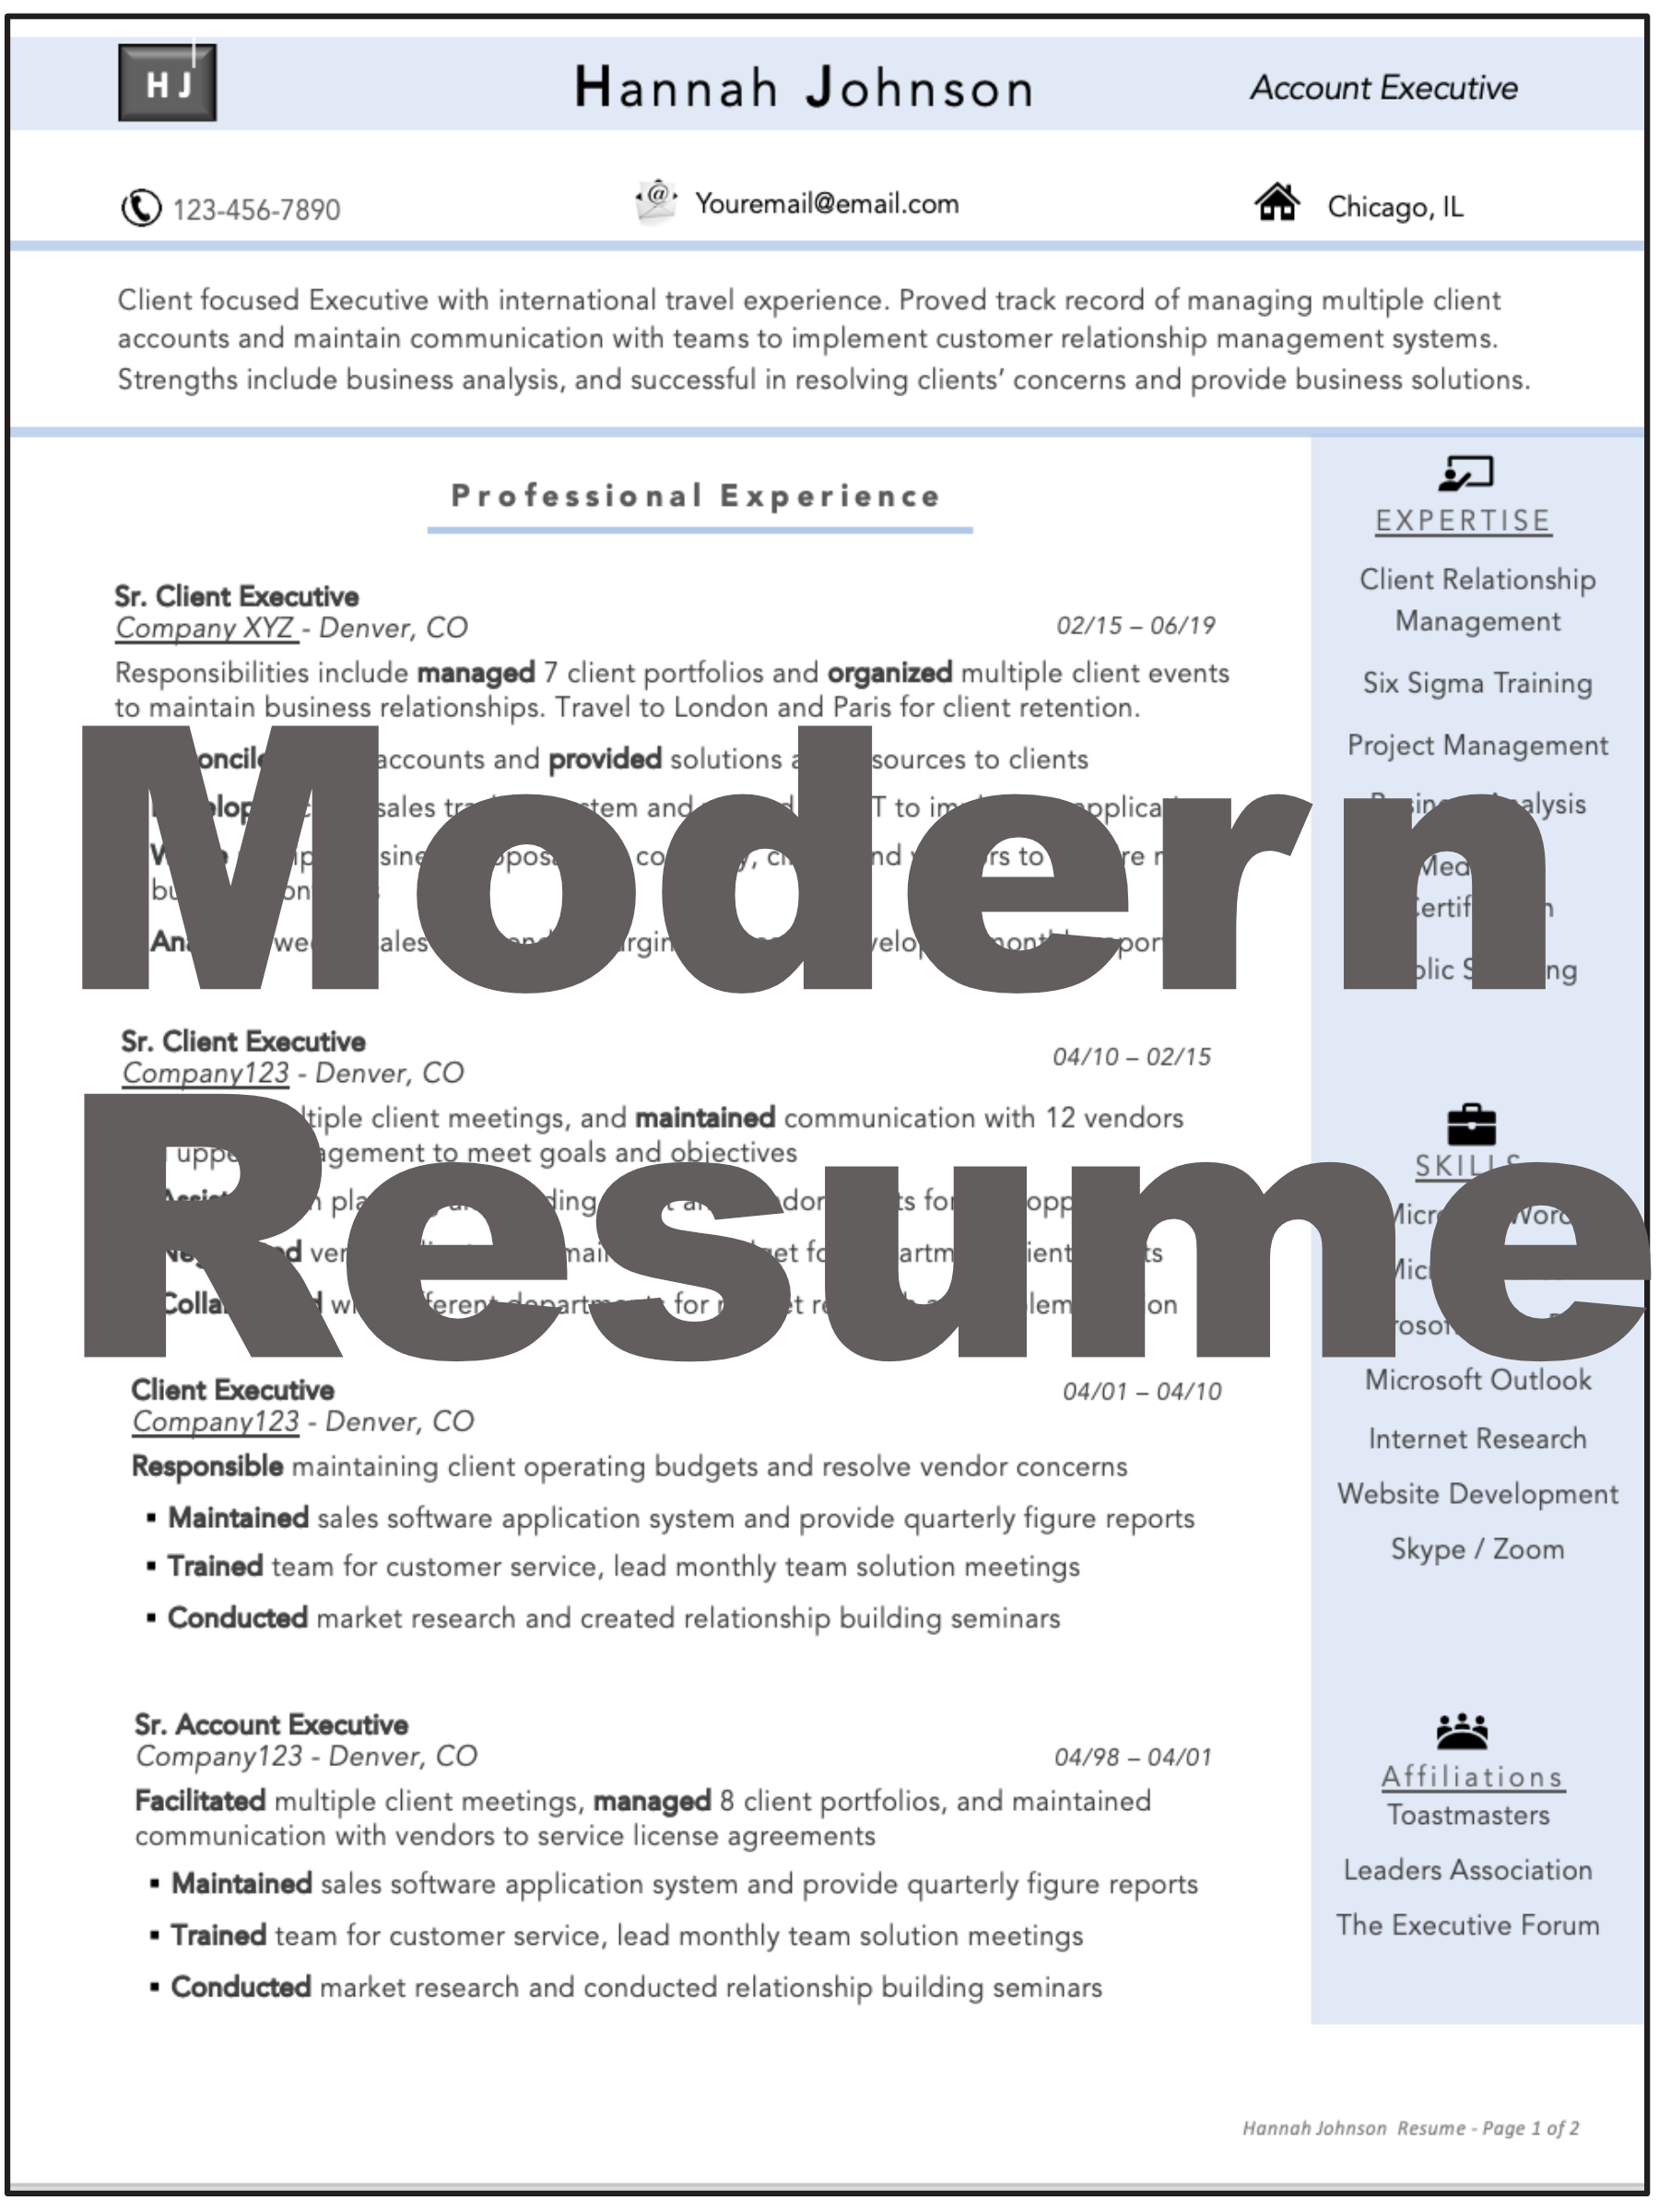 modern resume is another for of a professional resume. Having answers to interview questions tell me about yourself ready to go with a great cover letter template and the best resume format will work well for your job search!